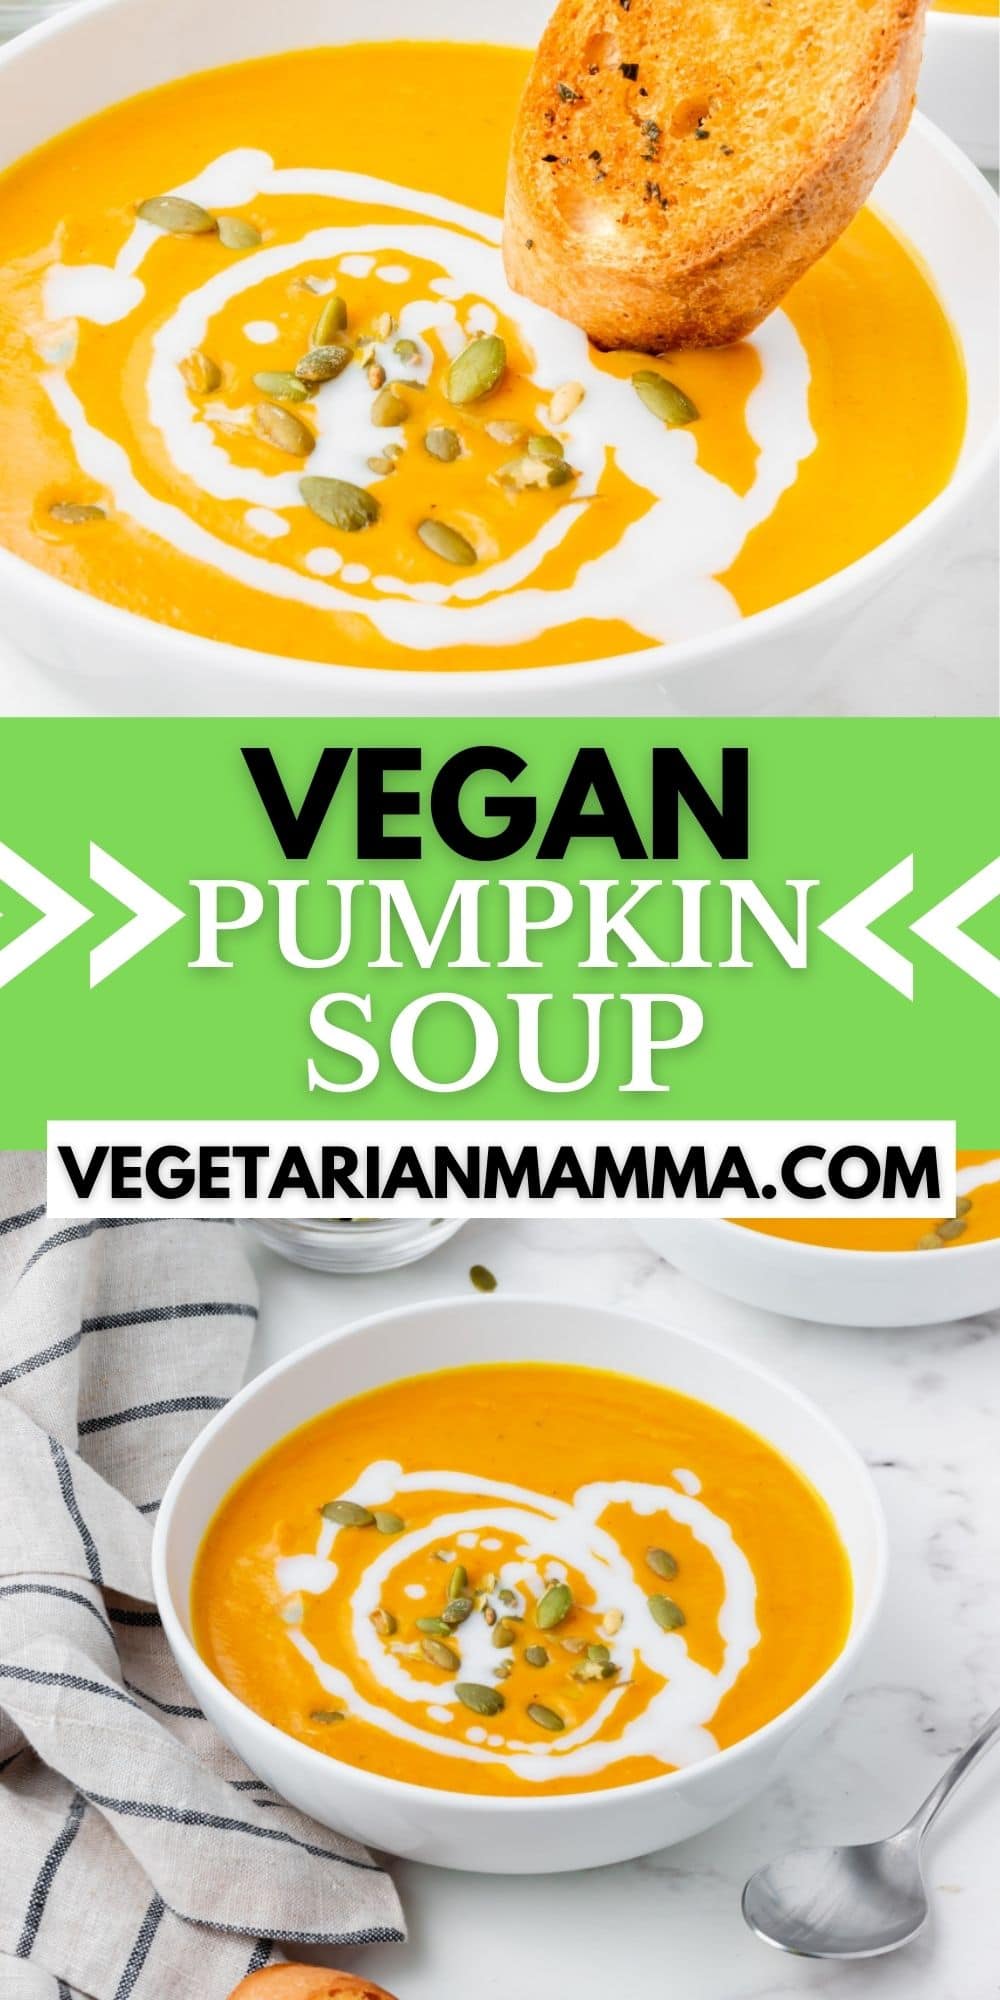 Vegan Pumpkin Soup is the thick and creamy fall soup of your dreams! Make the most luscious soup with canned pumpkin puree and coconut milk topped with pumpkin seeds for a yummy crunch.